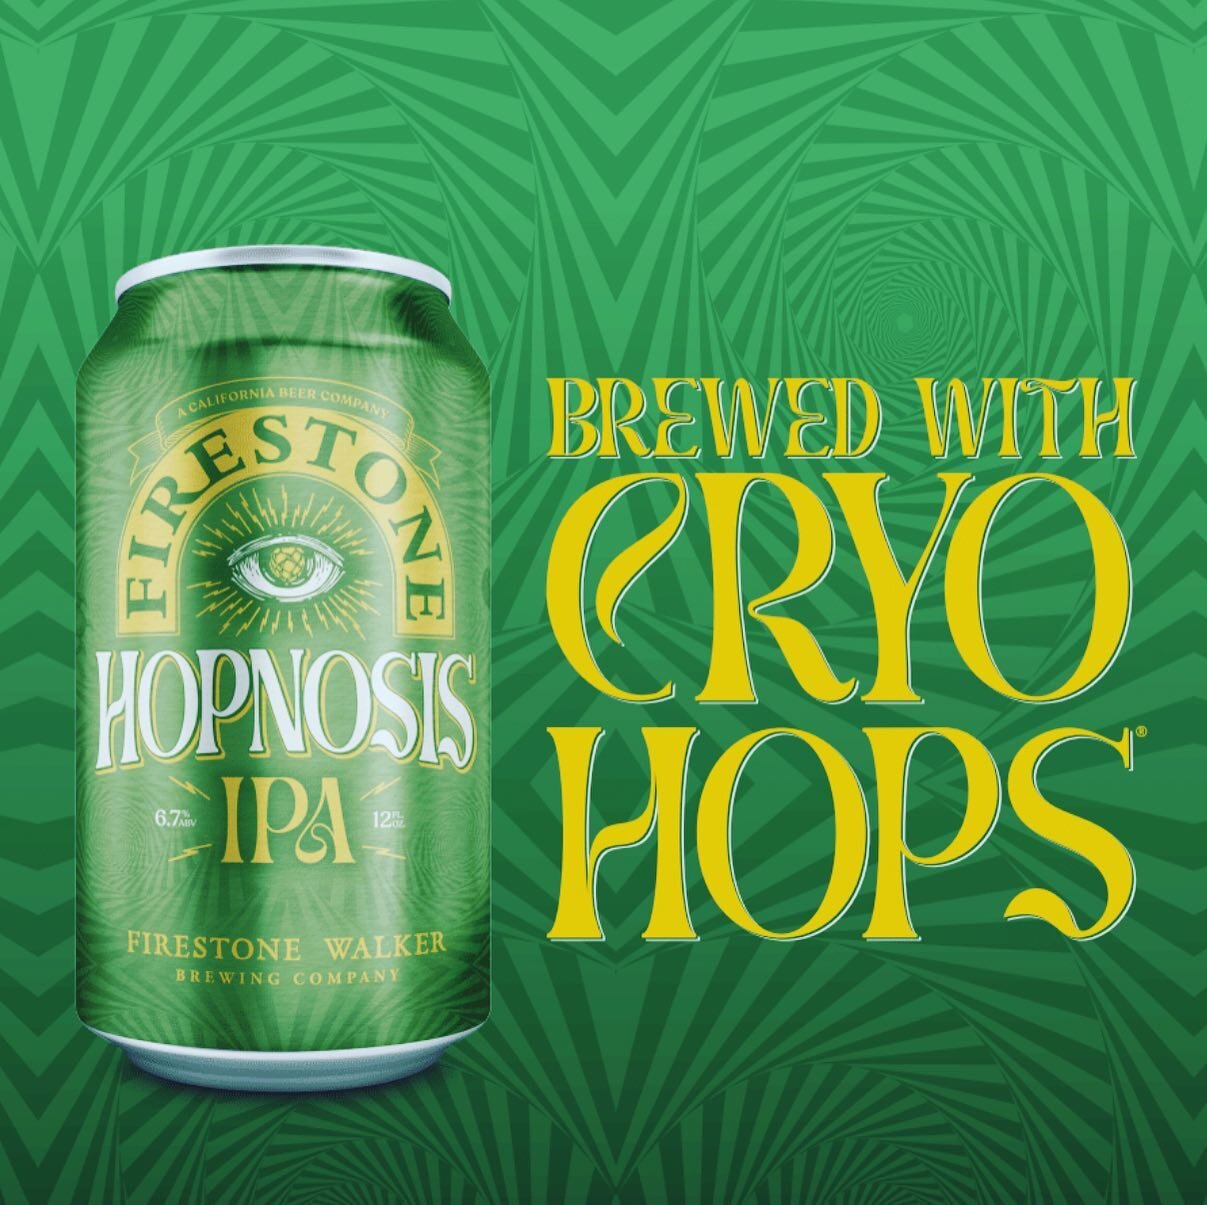 Friday @meltkitchenandbar means $3.50 craft cans. Today is extra special because we got our hands on a special from Cali. Firestone Walker brewing @firestonewalker got us some of these little babies. #hopnosis cryo hops from both the US and New Zeala